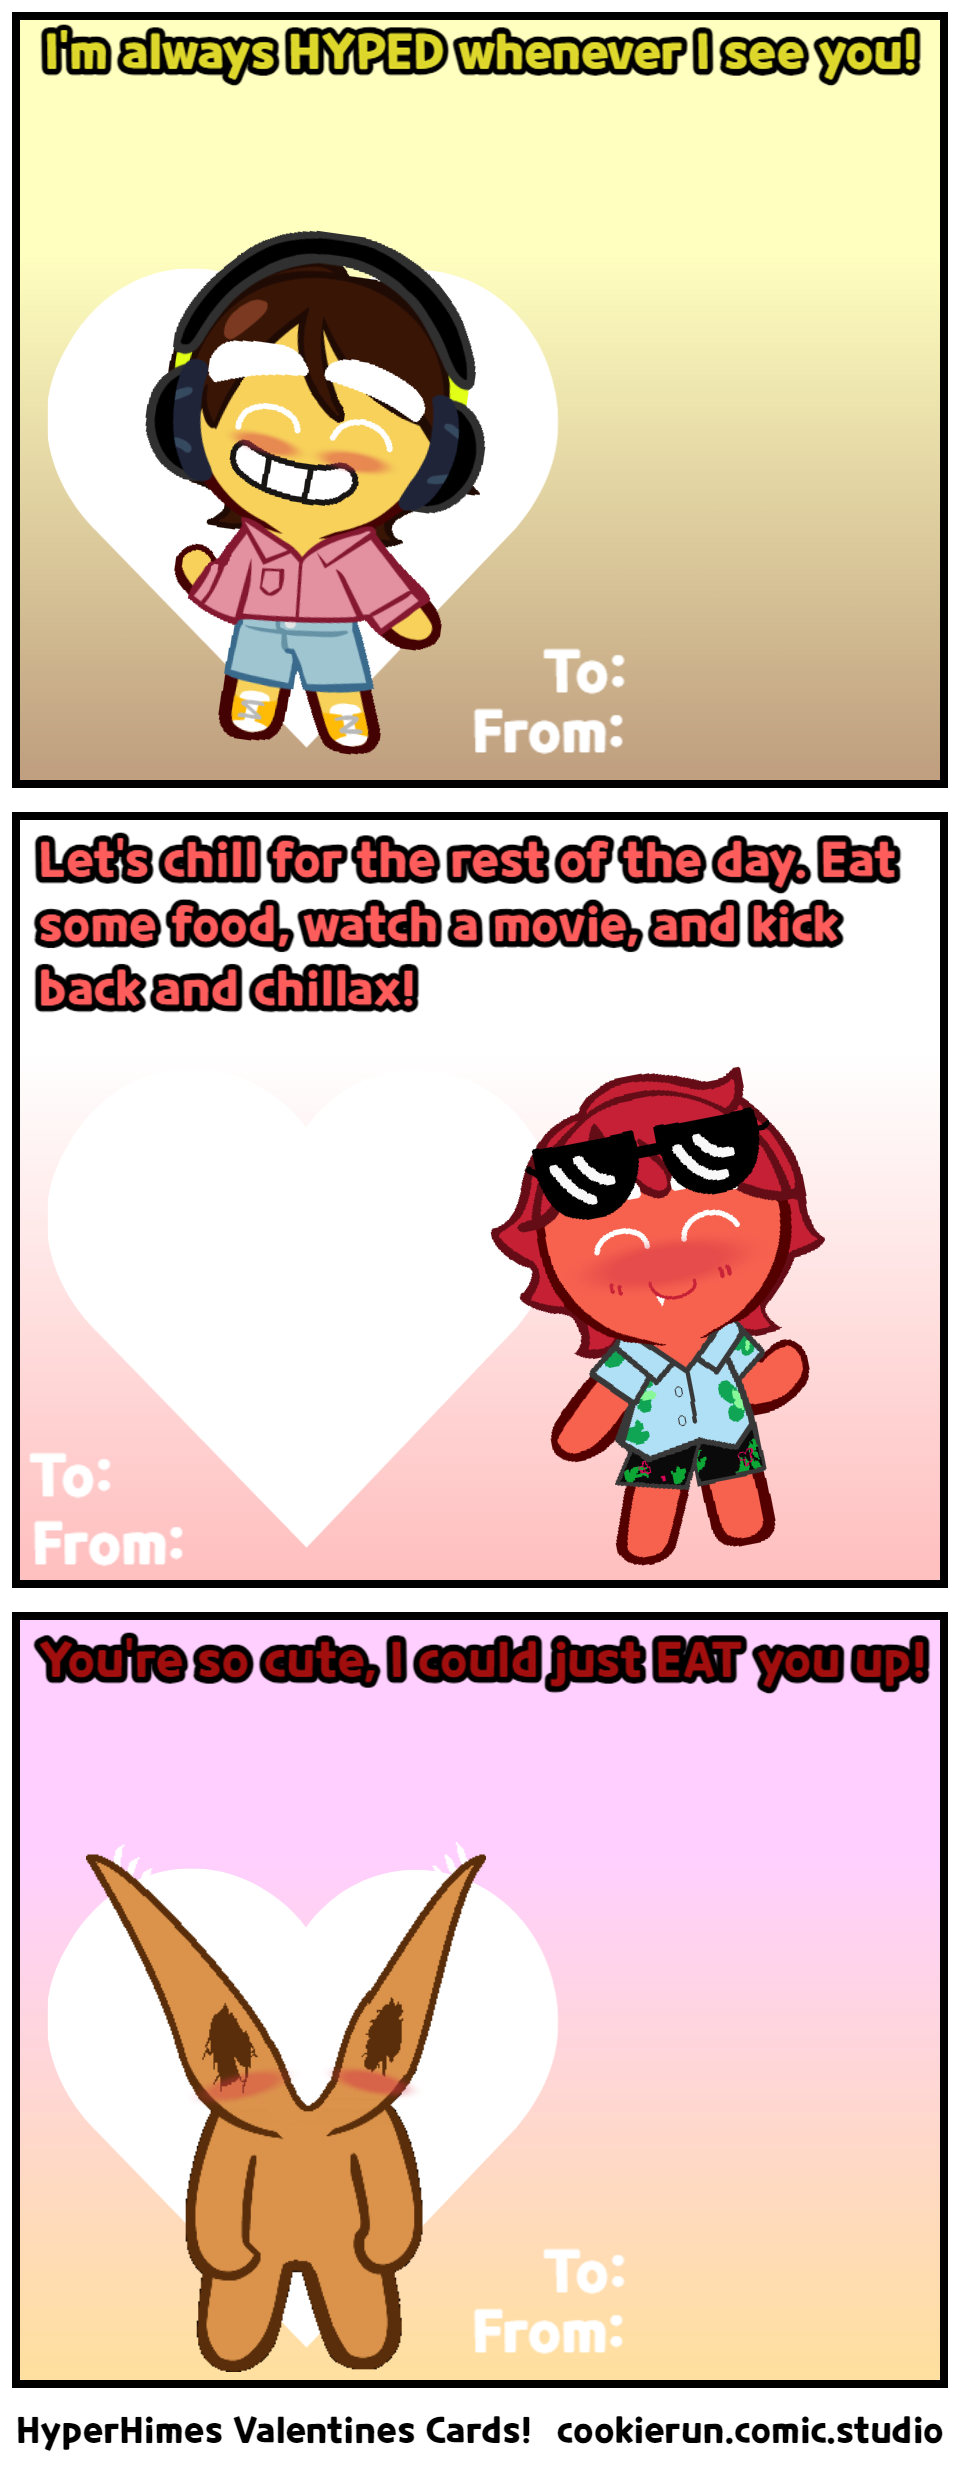 HyperHimes Valentines Cards!